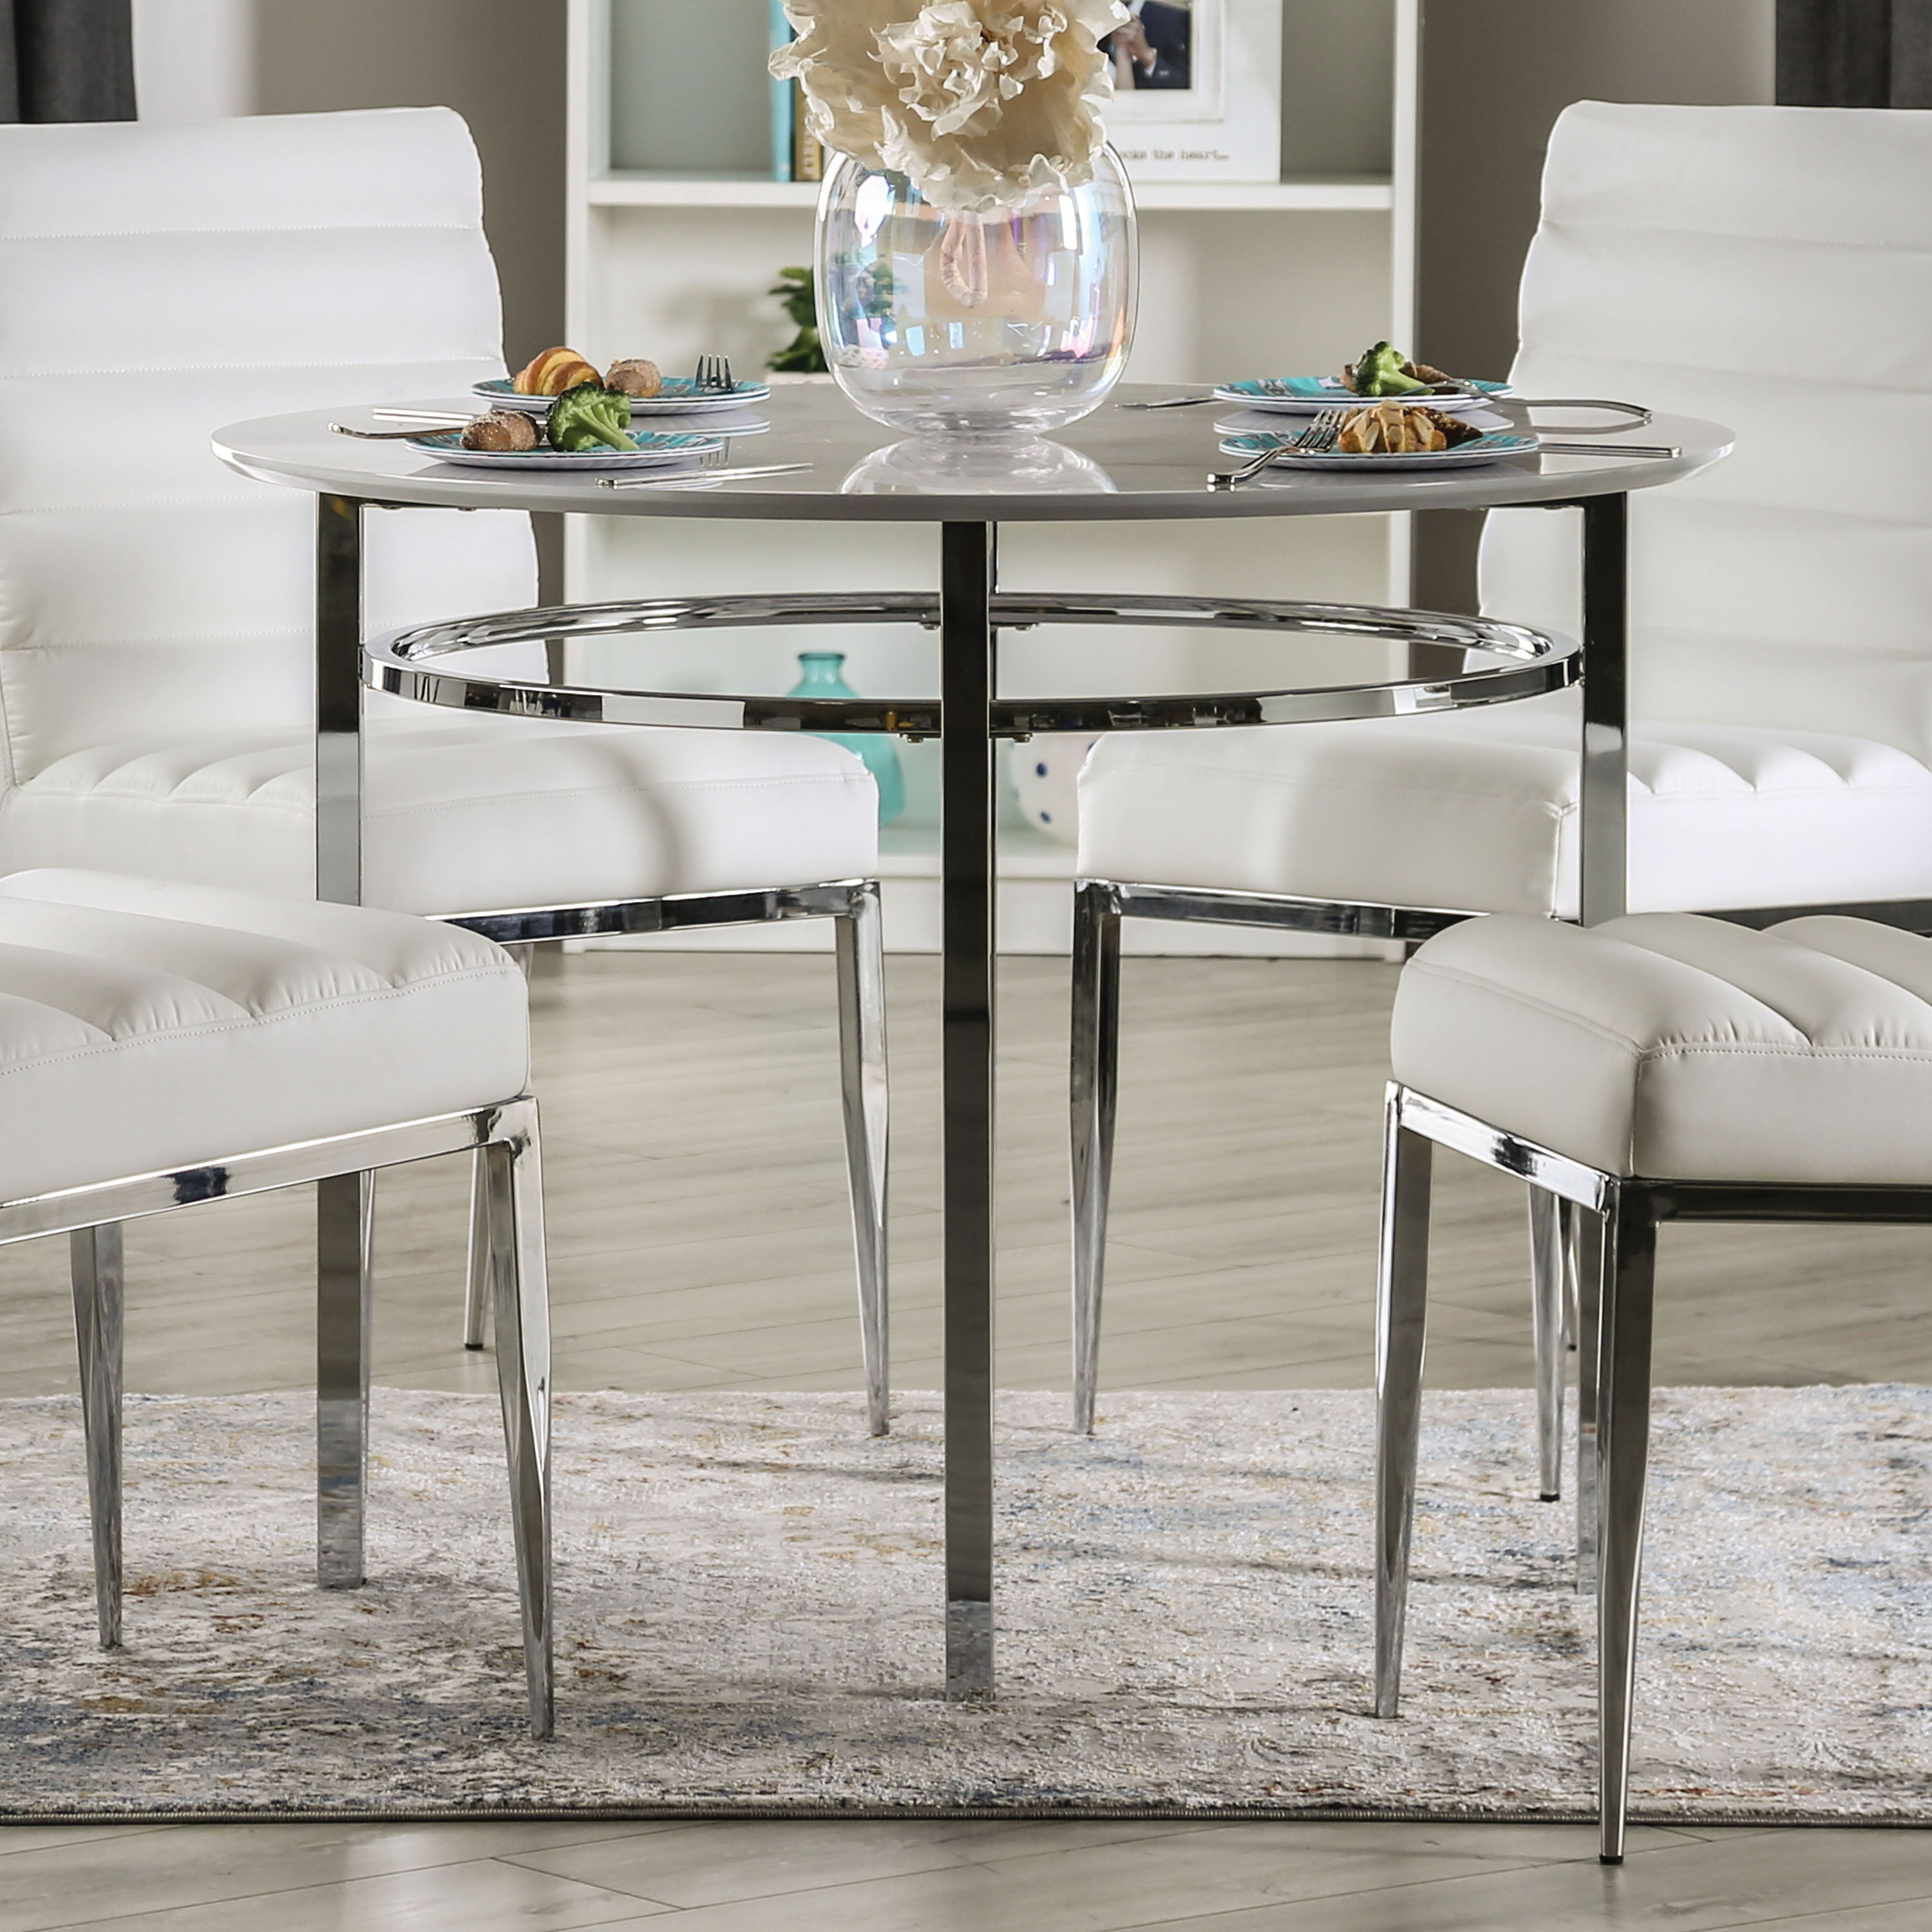 Furniture of America Clay Contemporary Round Dining Table, White and